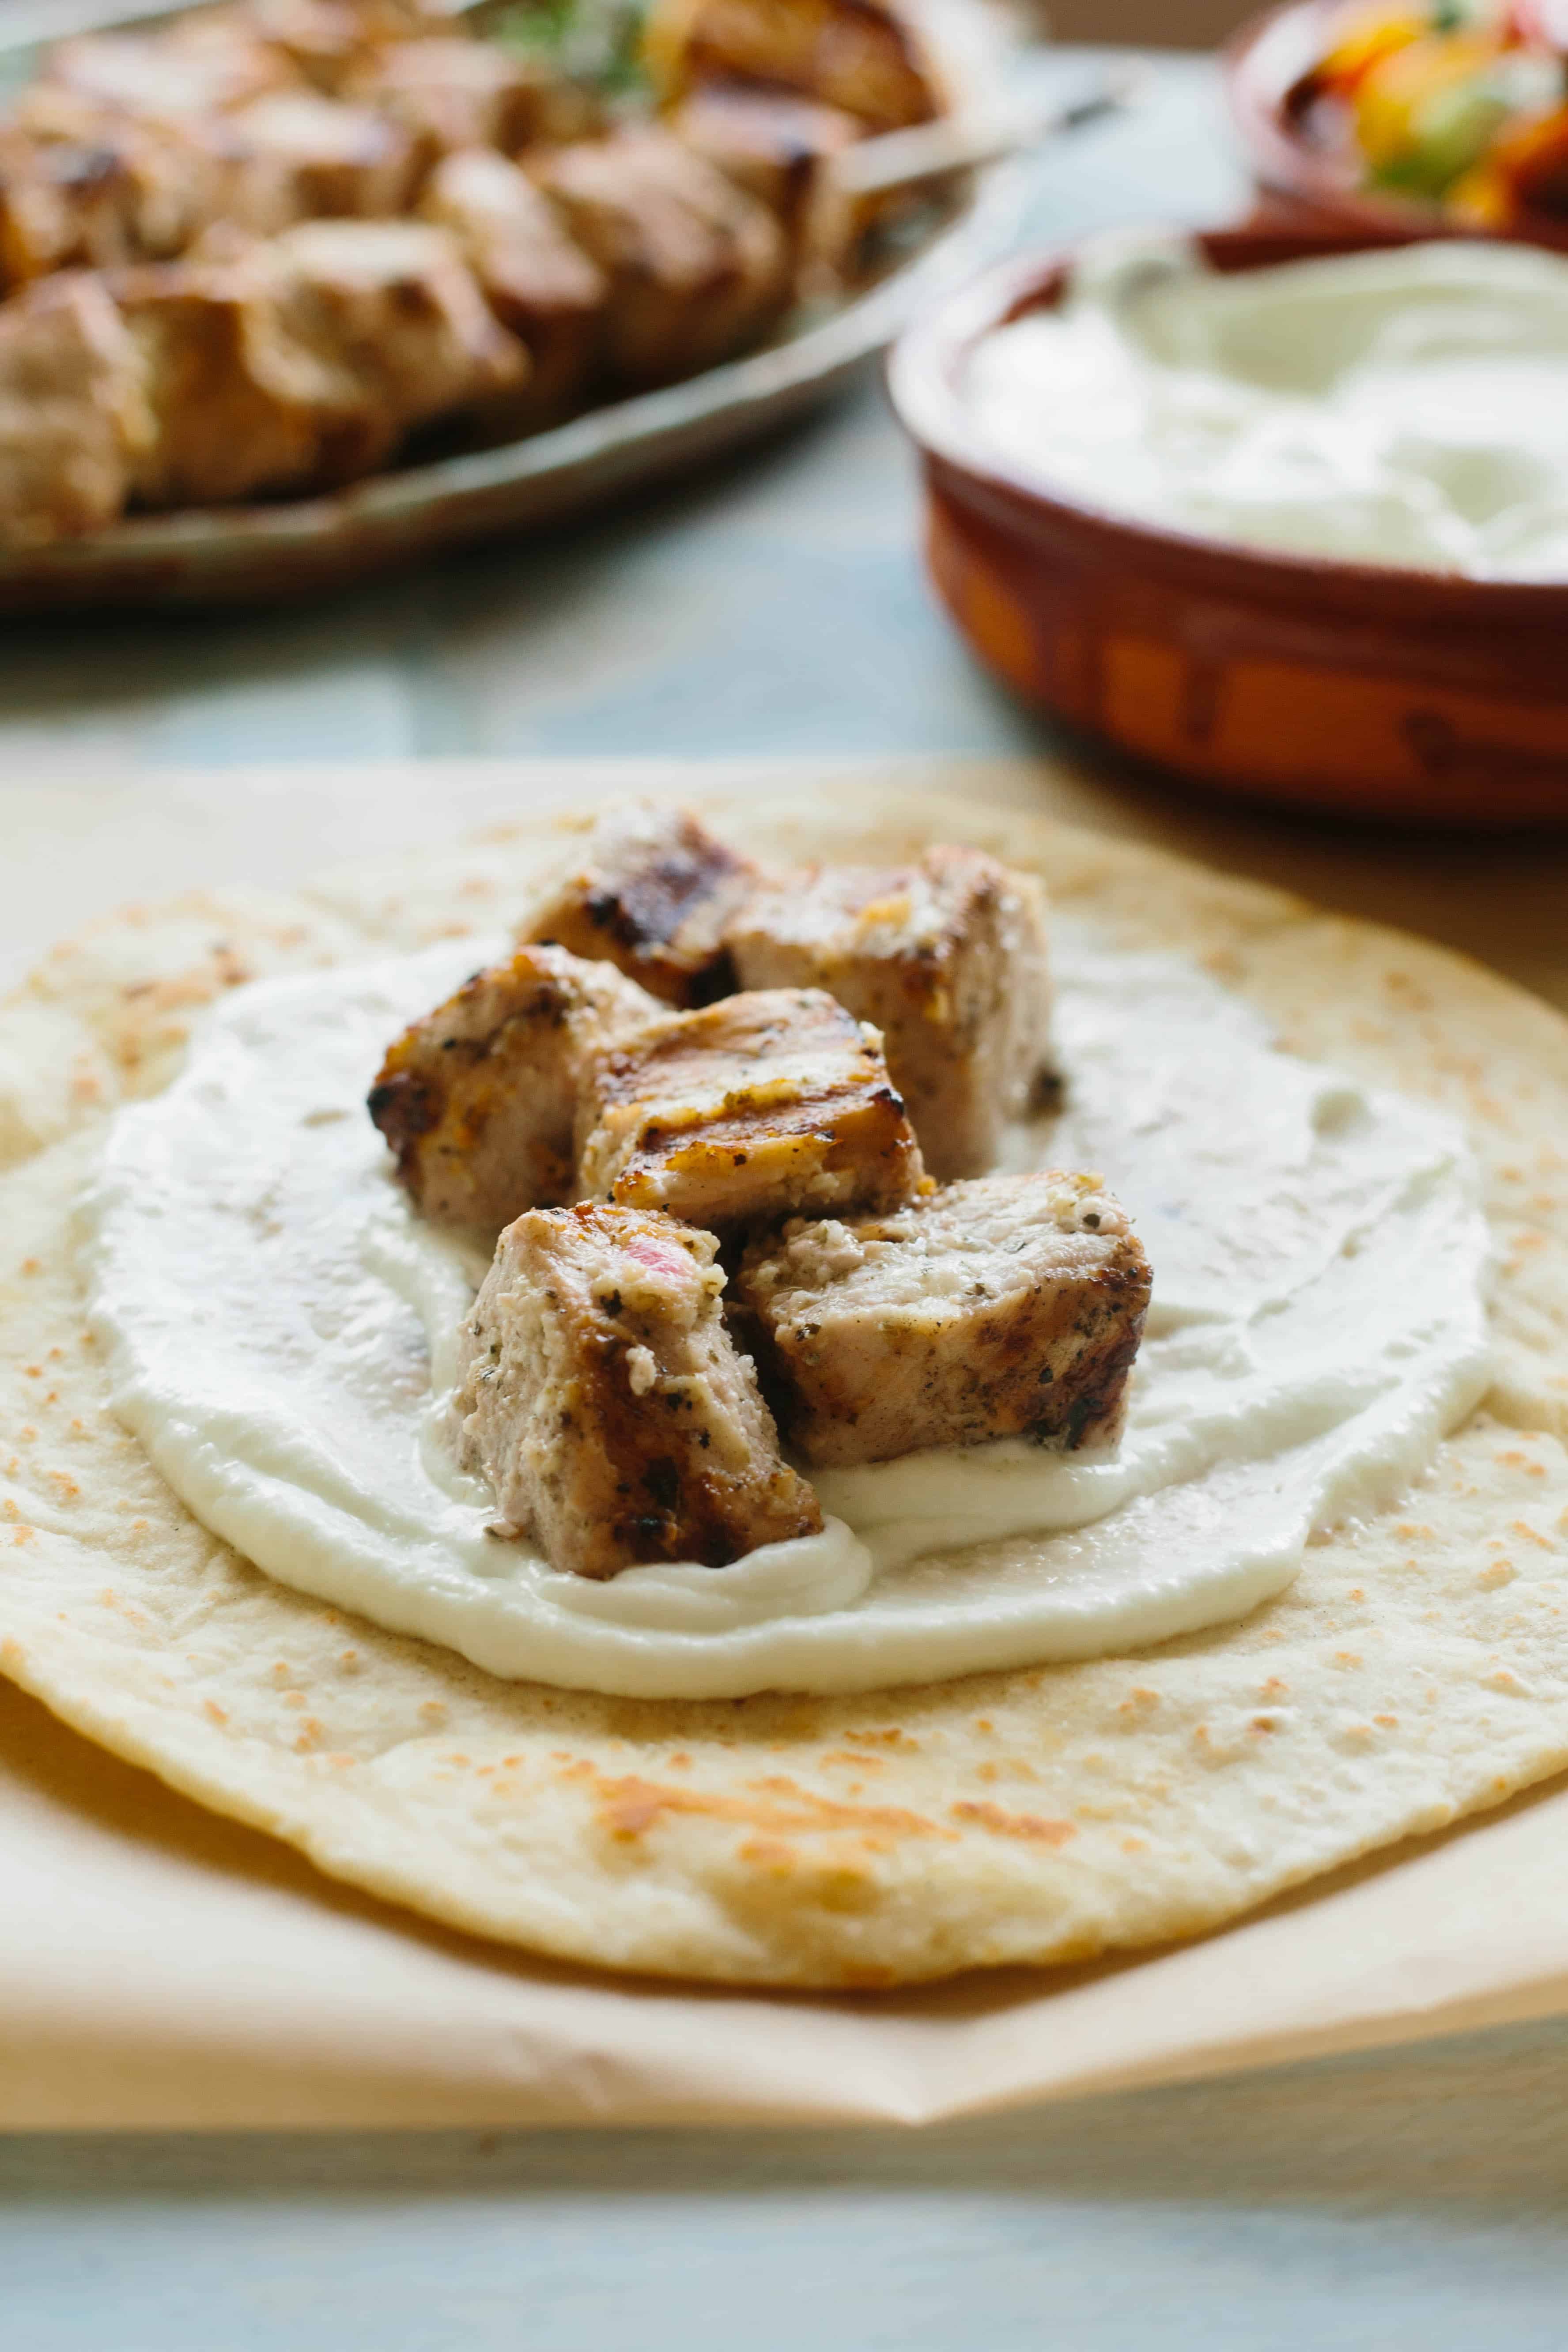 A pita spread with garlicky sauce and grilled pork cubes.